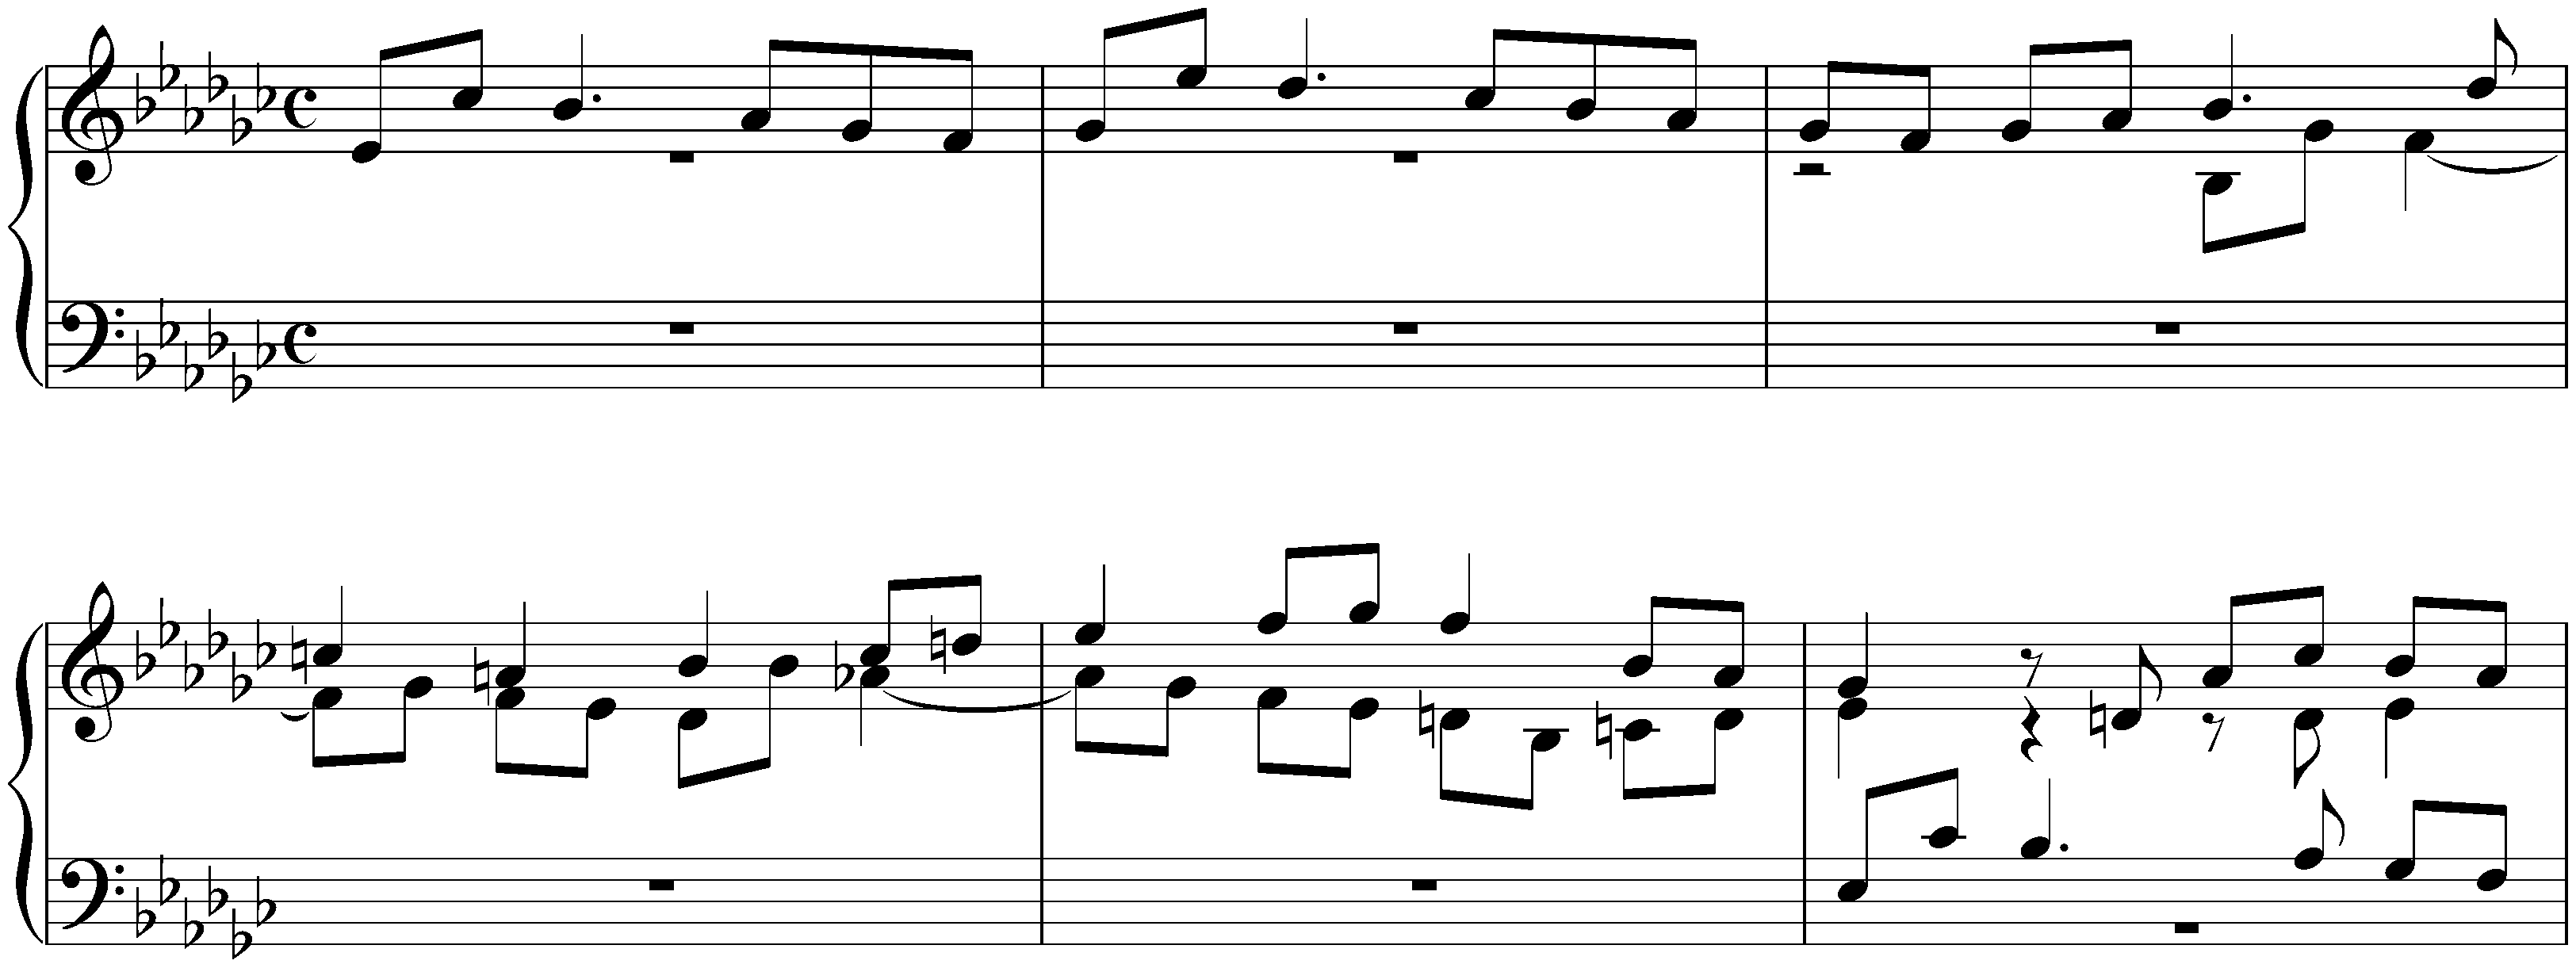 Fugue in E-flat minor, BWV Anh. 102